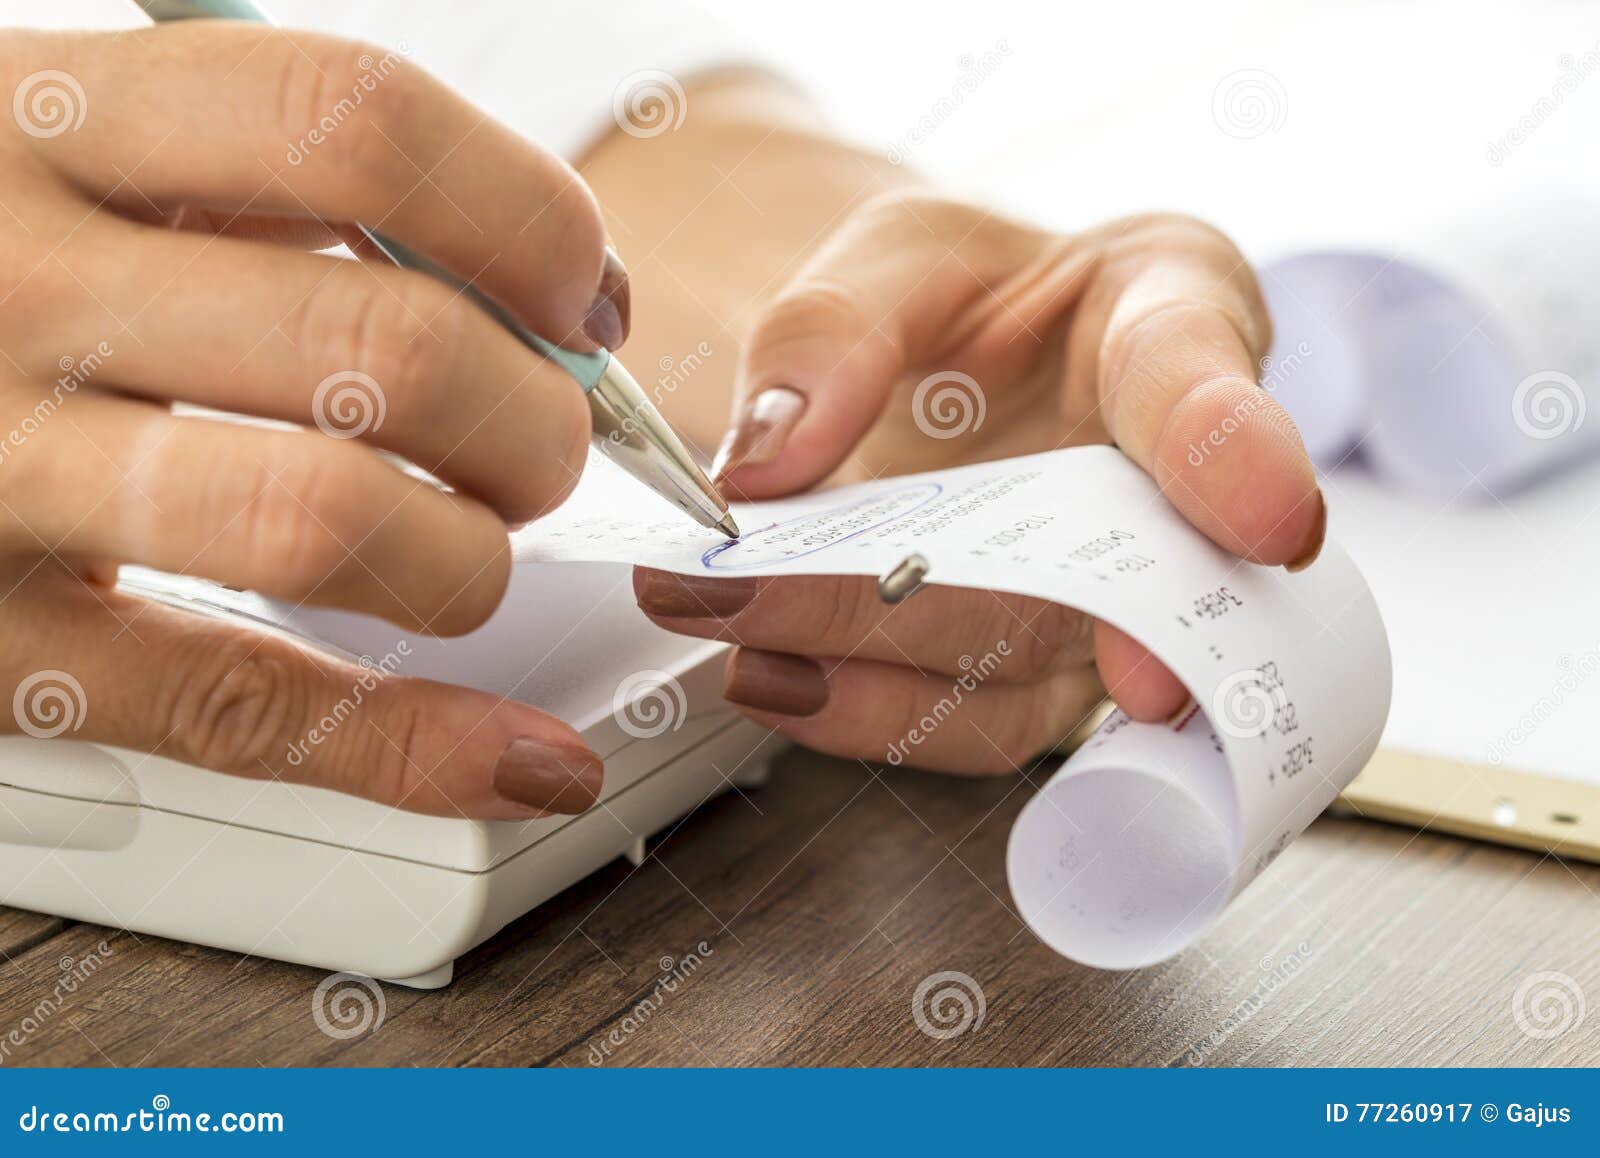 woman circling numbers on paper receipt